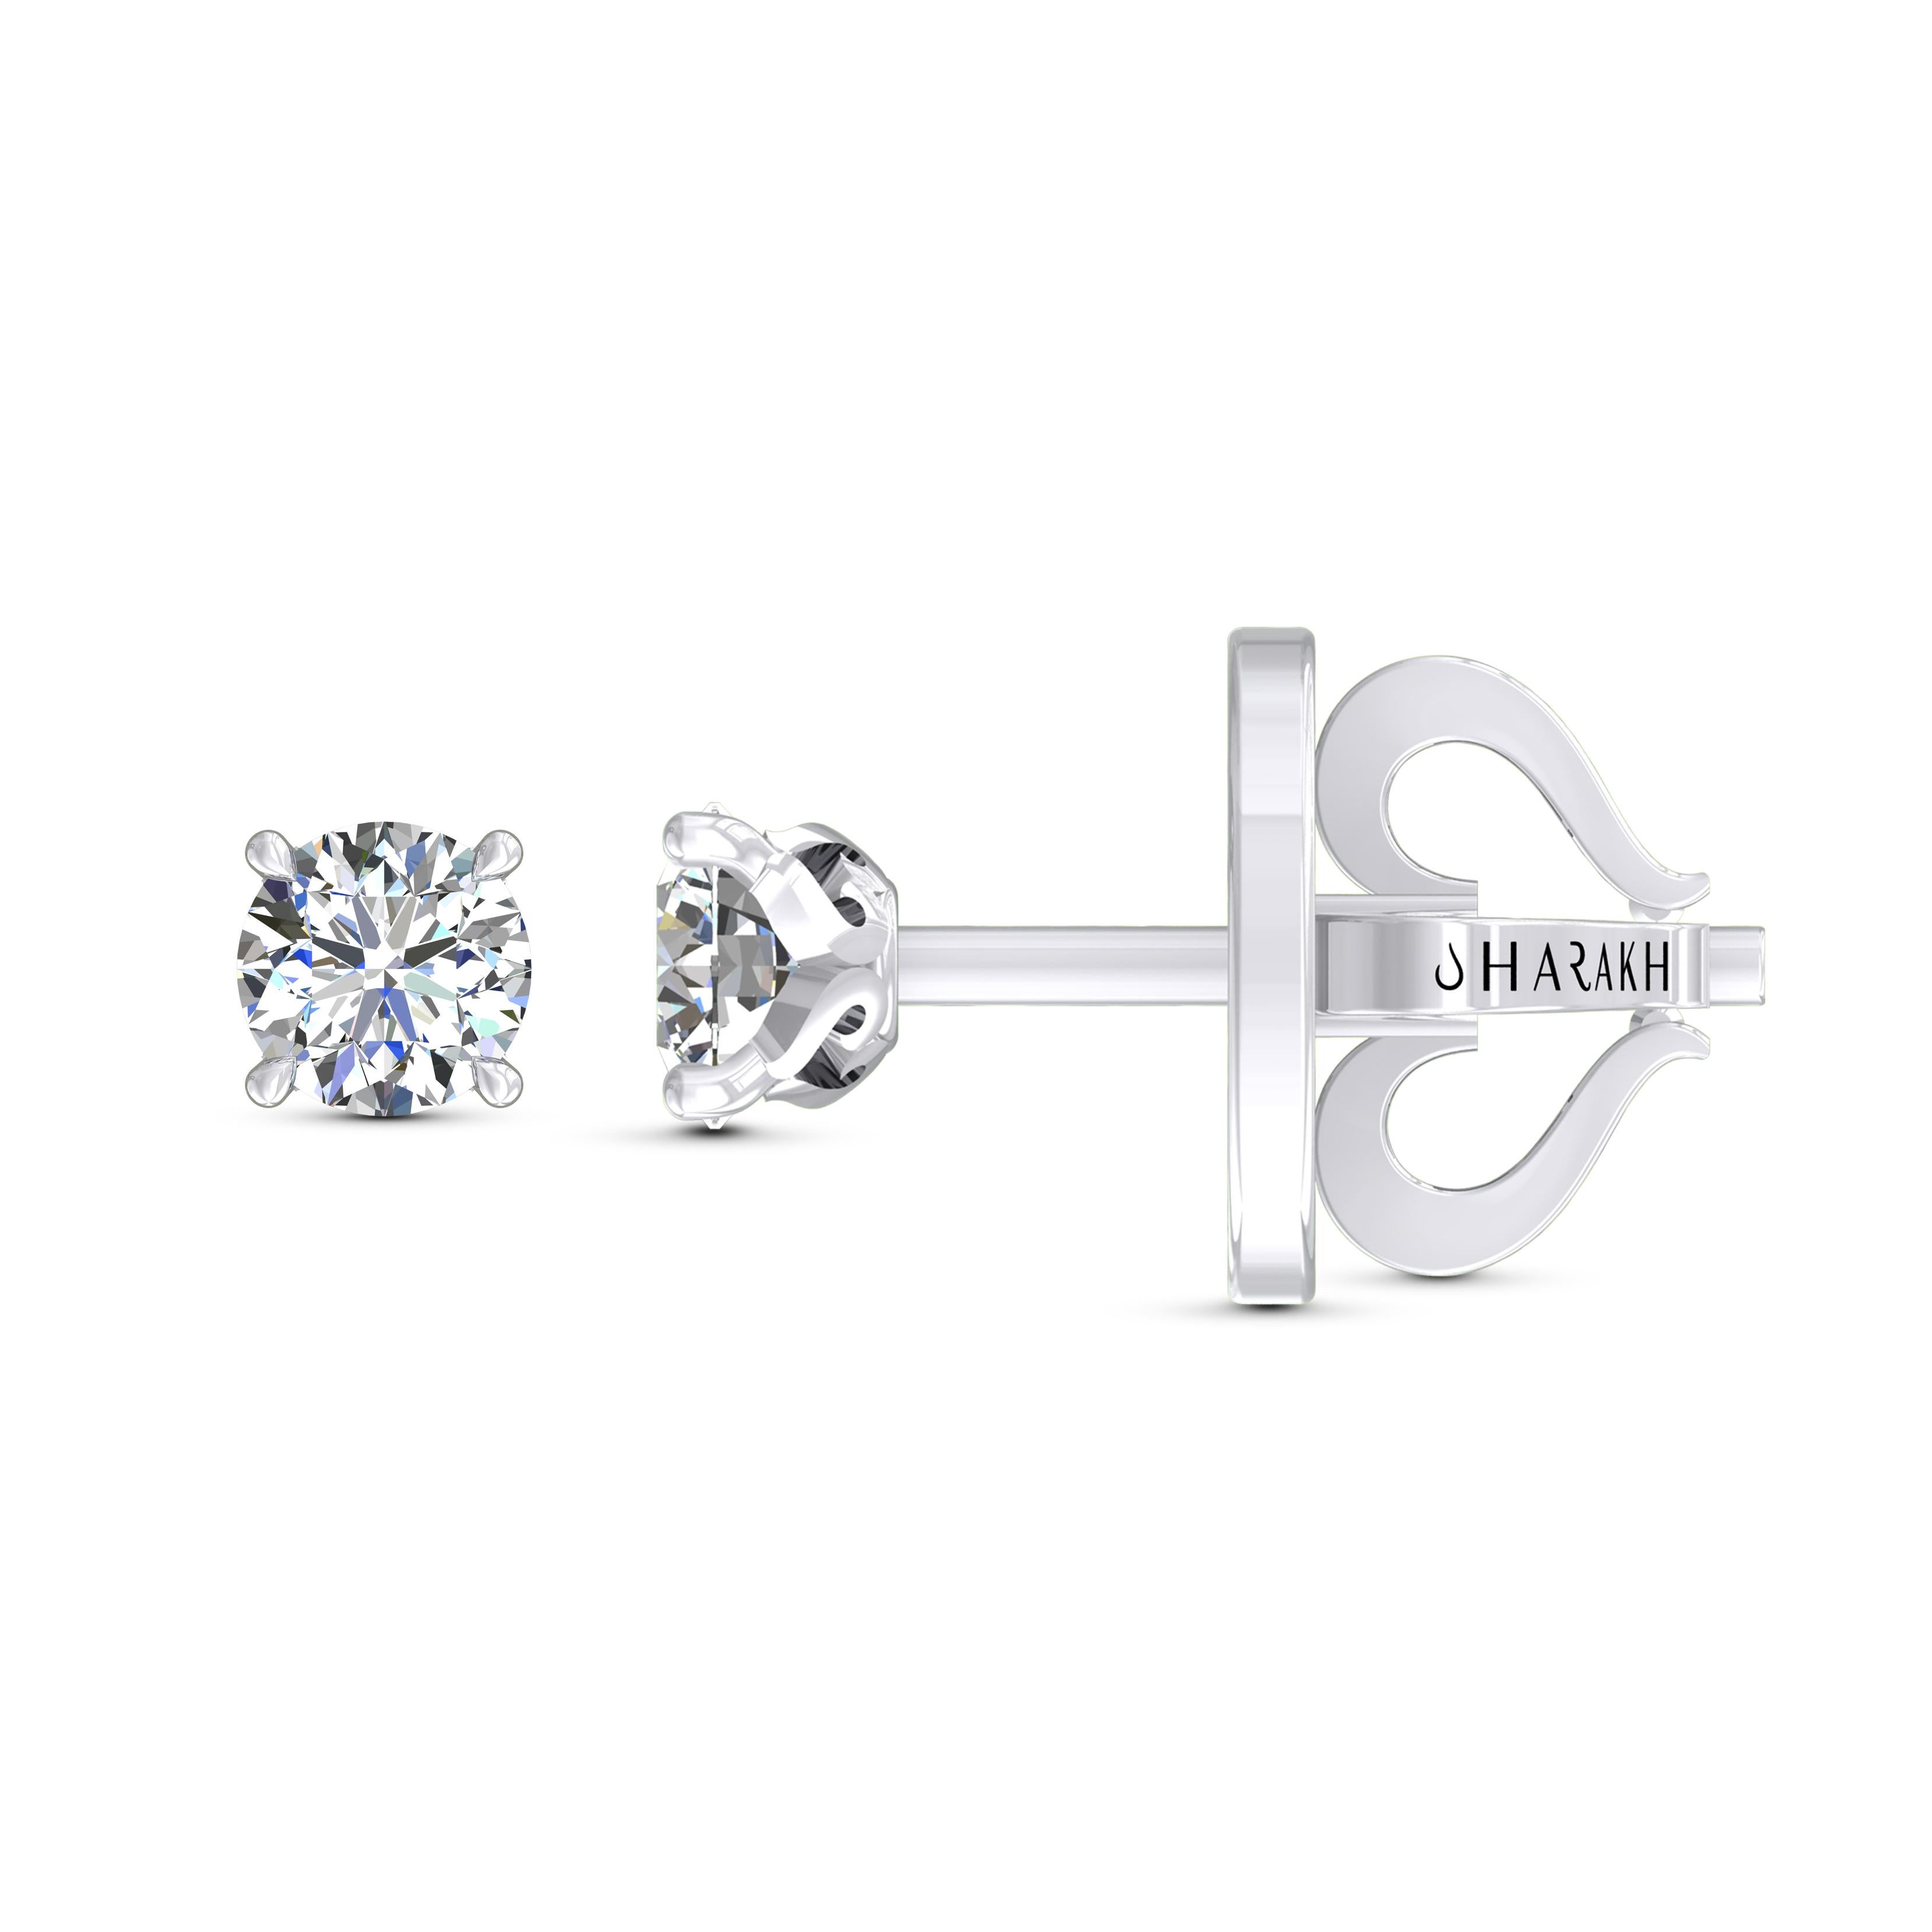 Contemporary Harakh GIA Certified 0.68 Carat F Color VS2 Clarity 18 KT Diamond Stud Earrings For Sale